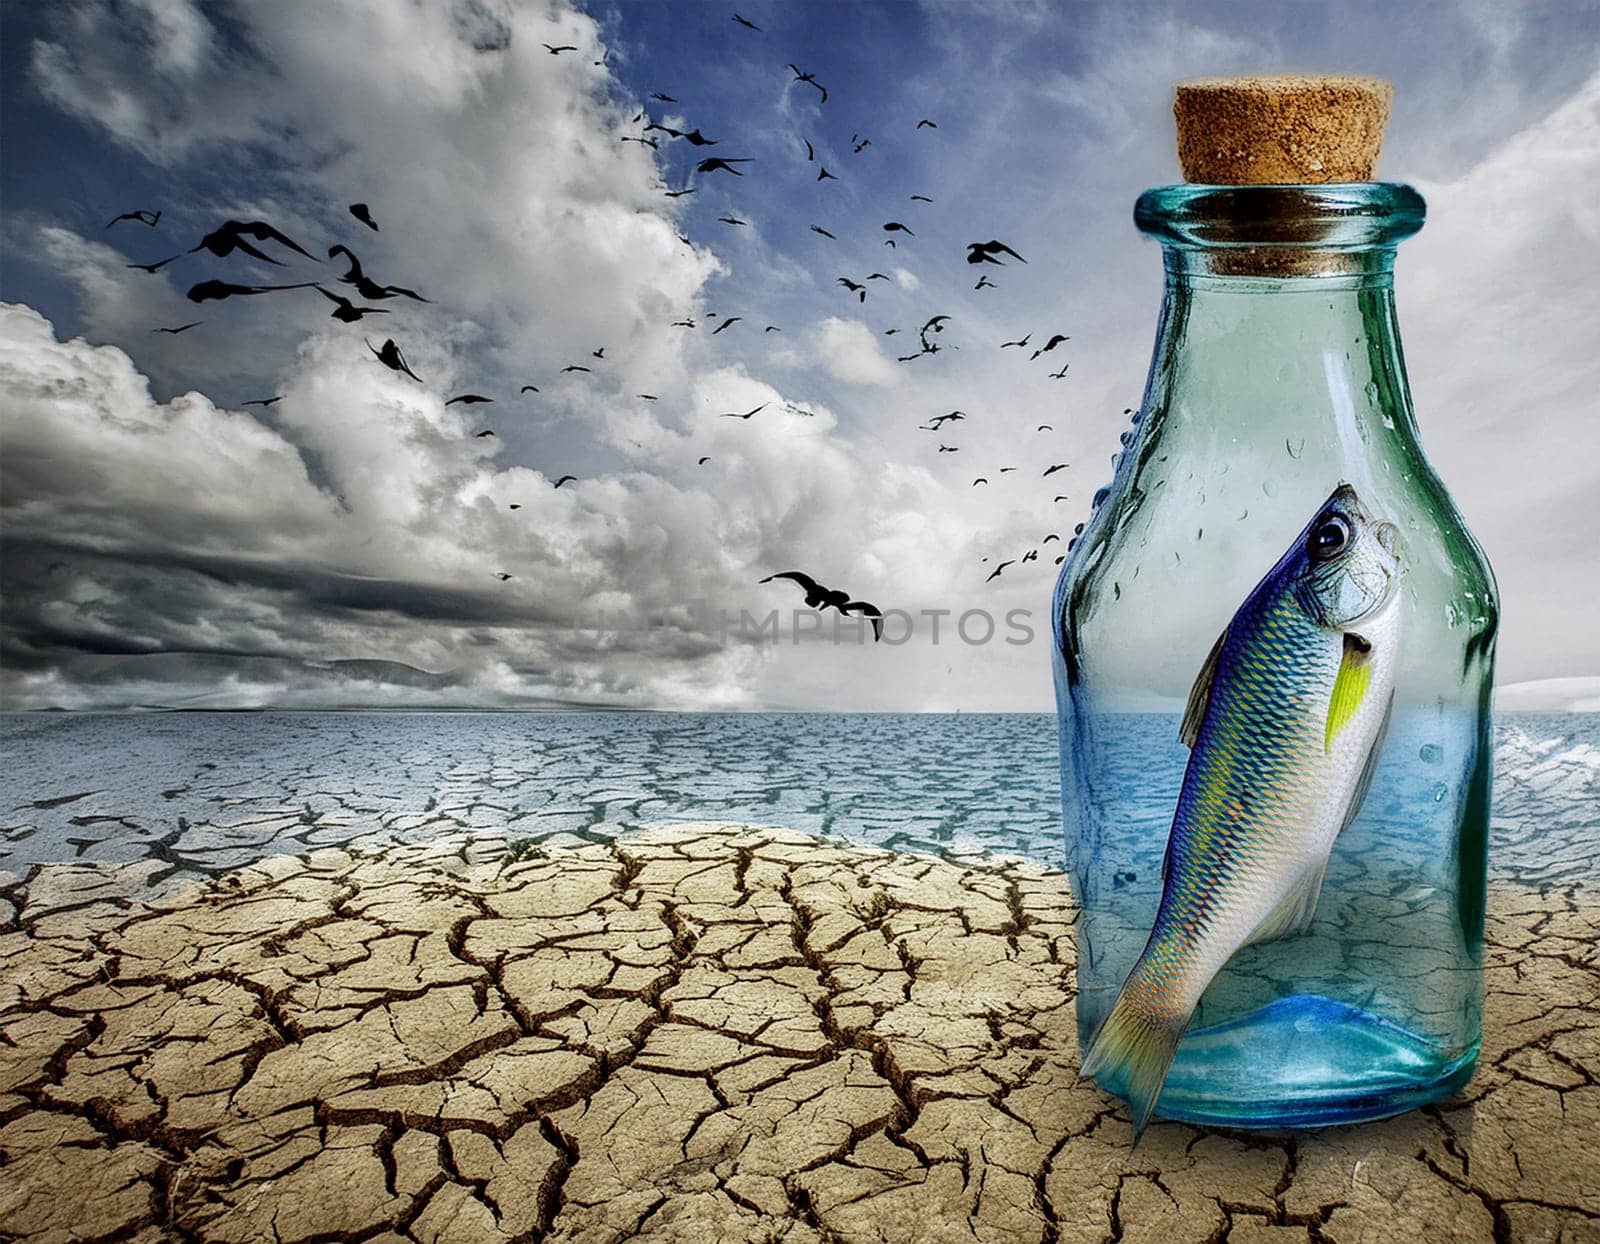 Environmental pollution sea of water, fish in bottle message in a bottle,